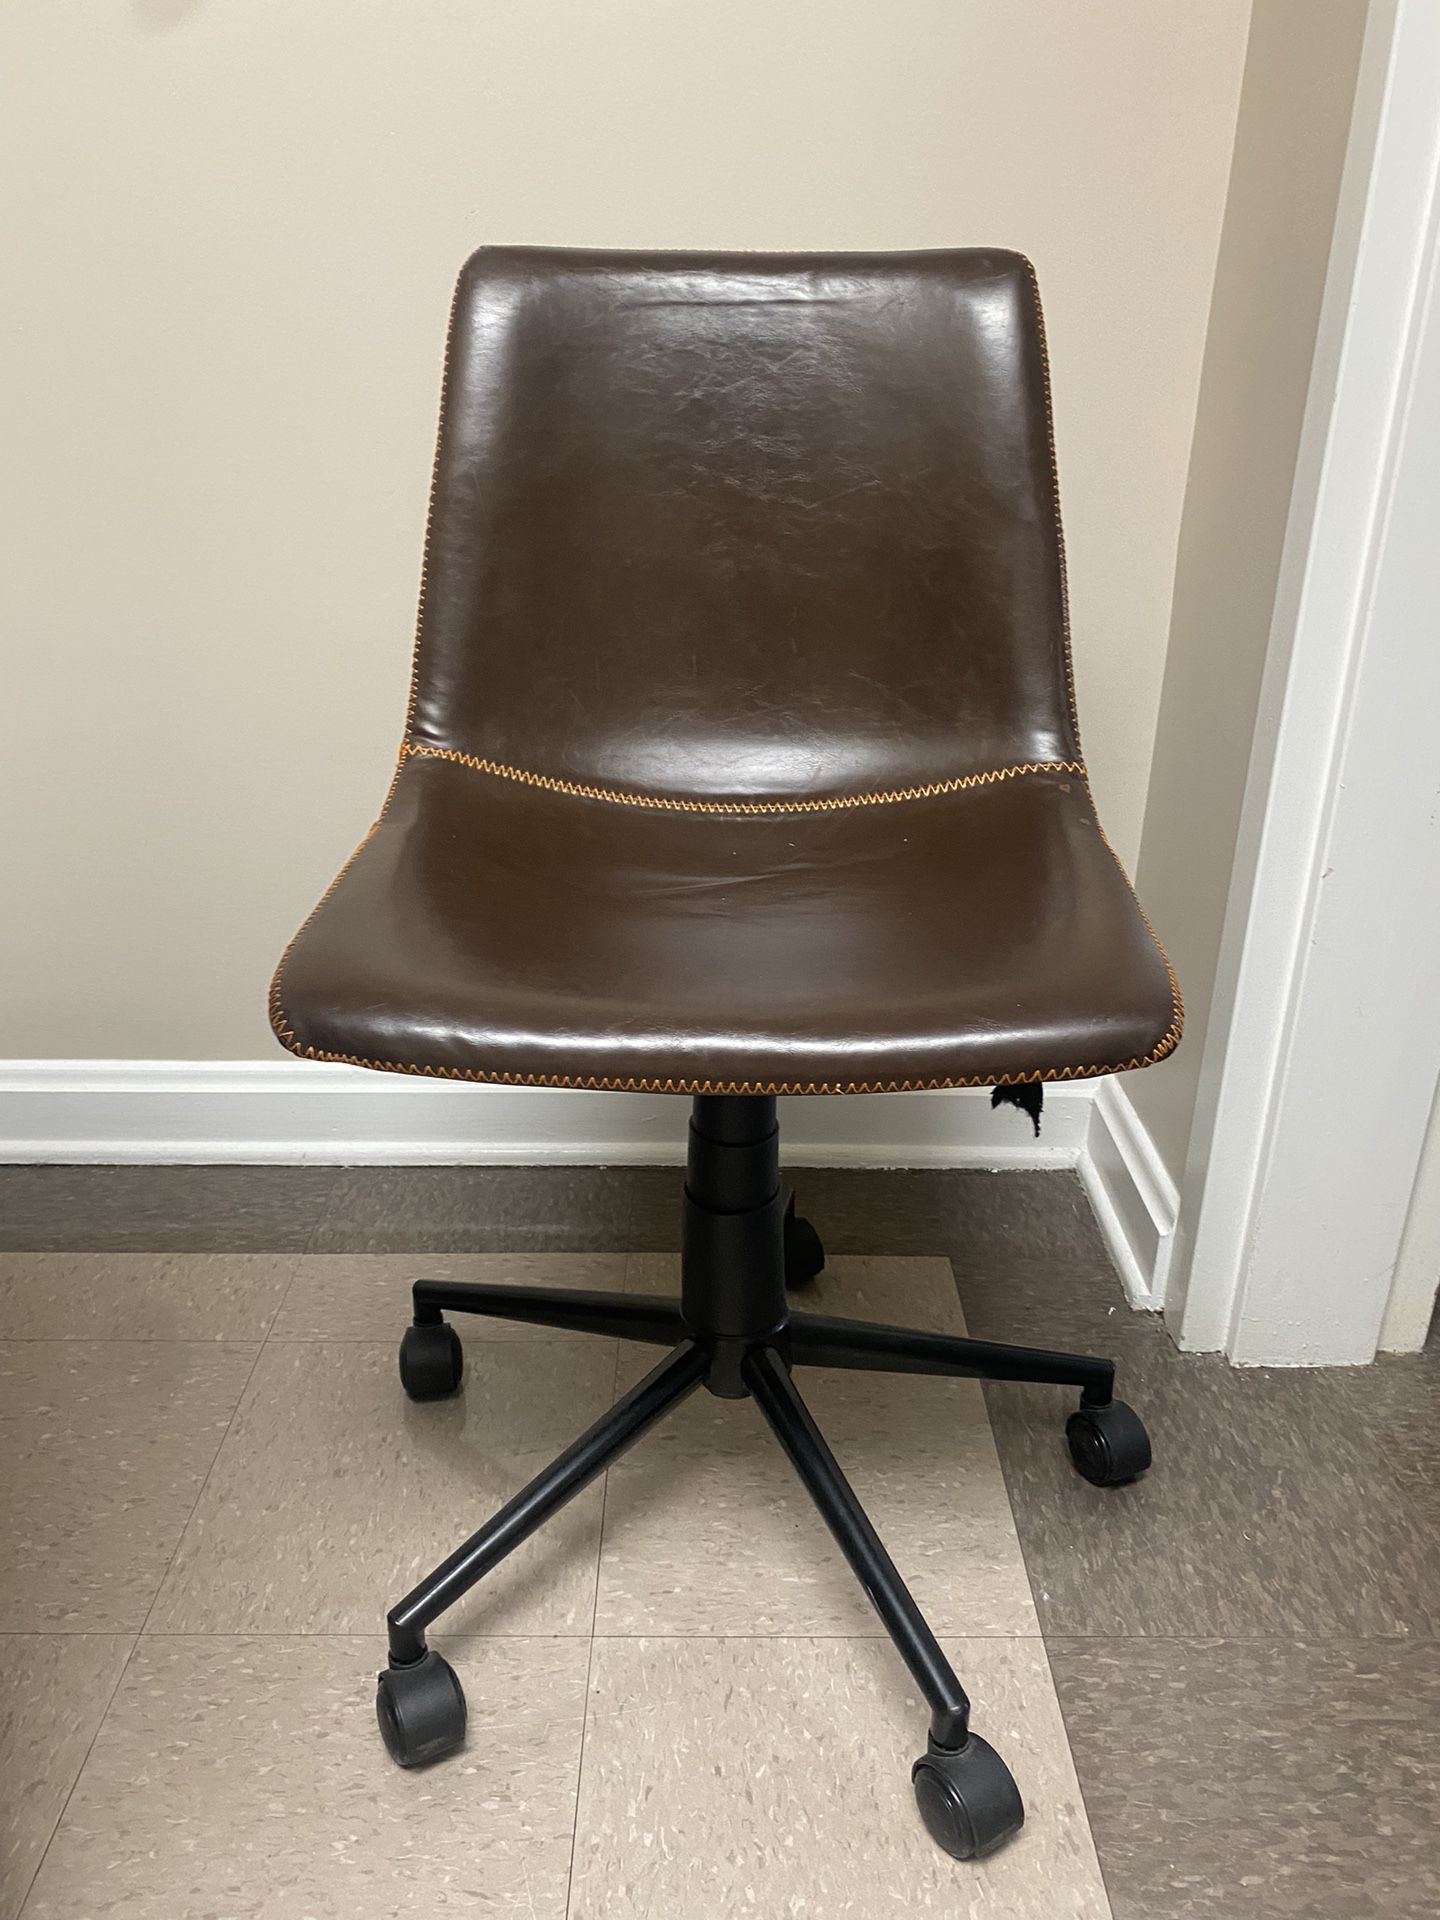 Brown leather Desk Chair